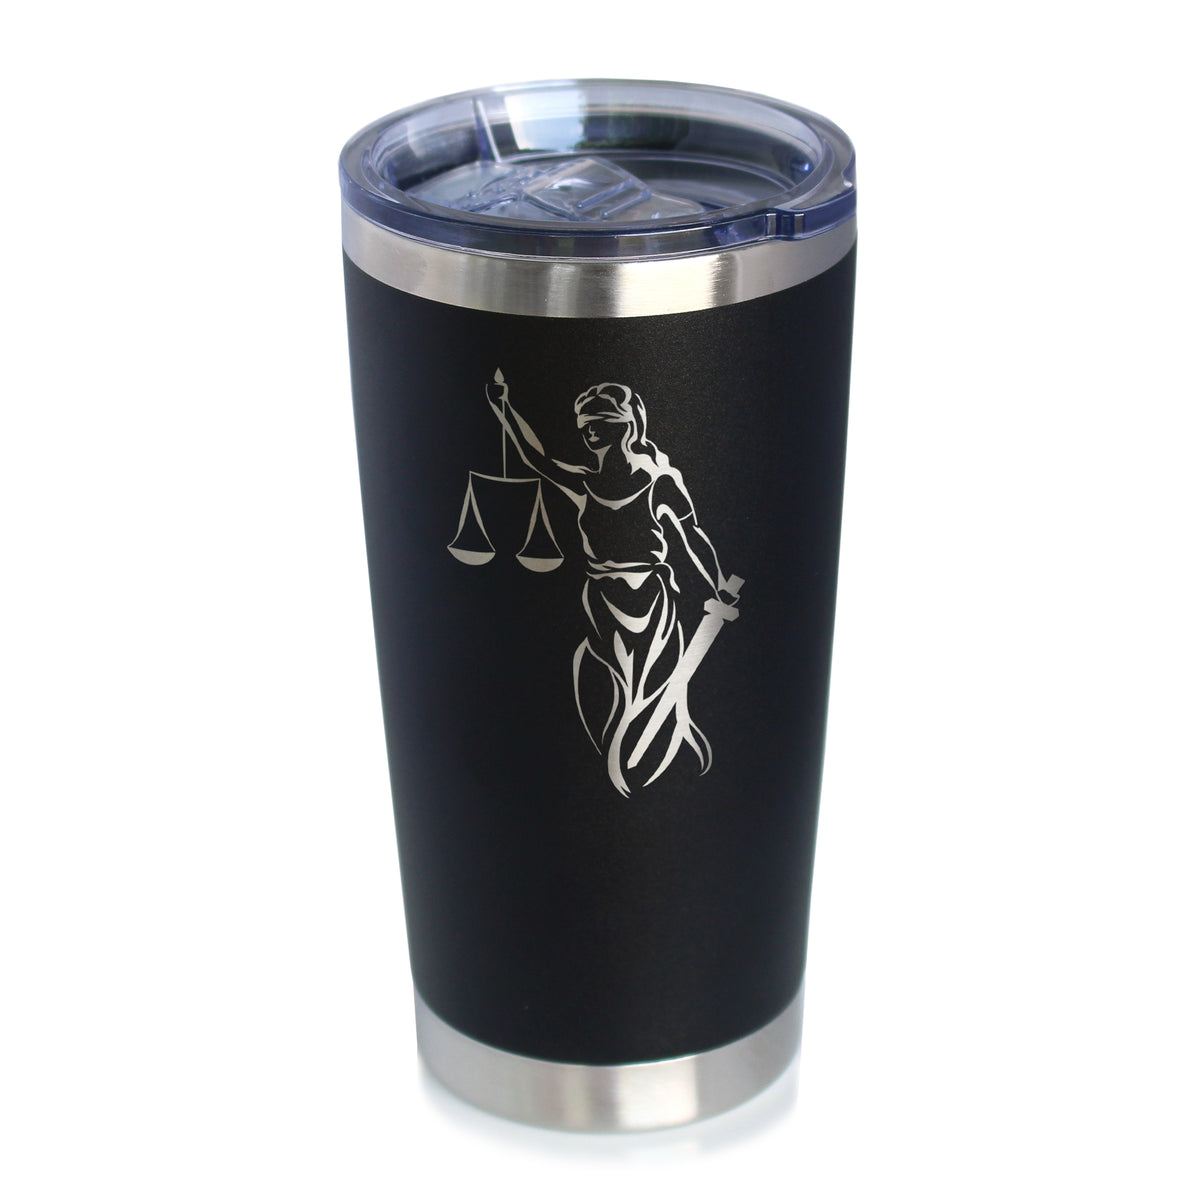 Lady Justice - Insulated Coffee Tumbler Cup with Sliding Lid - Stainless Steel Travel Mug - Unique Lawyer Gifts for Women and Men